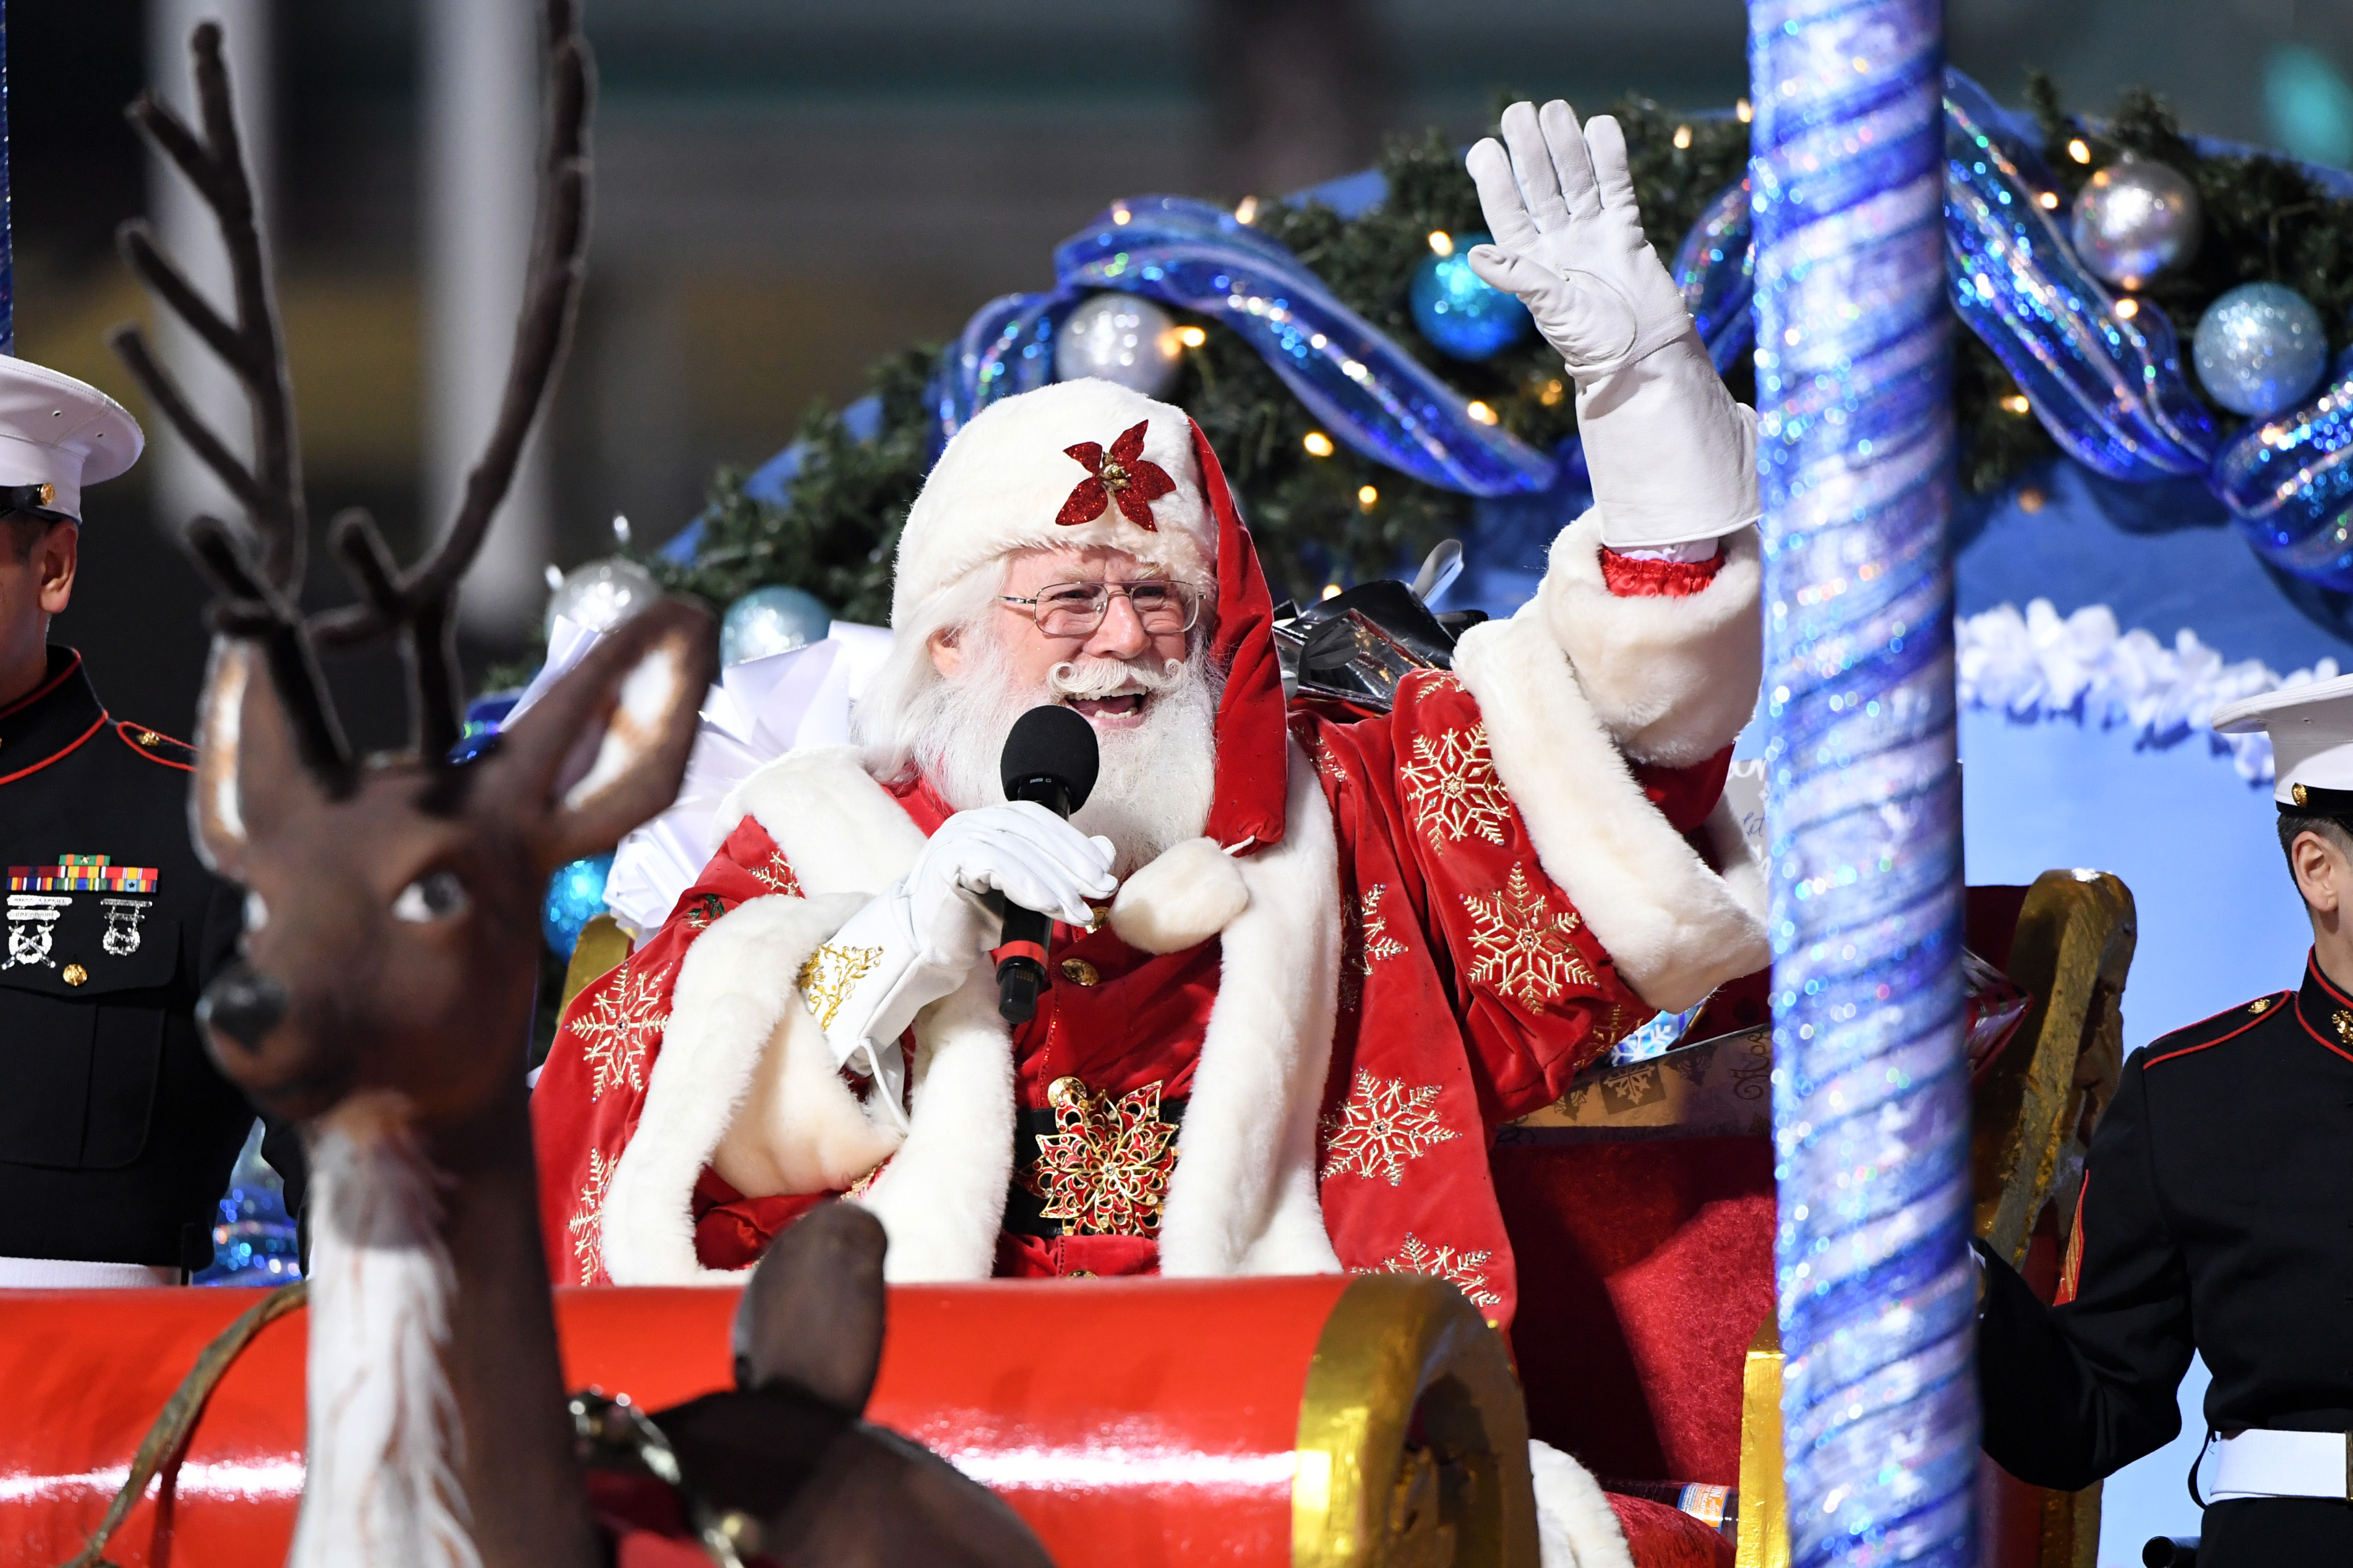 Santa Claus at the 90th Anniversary Of The Hollywood Christmas Parade in Hollywood, California on 90th Anniversary Of The Hollywood Christmas Parade on November 27, 2022 | Source: Getty Images